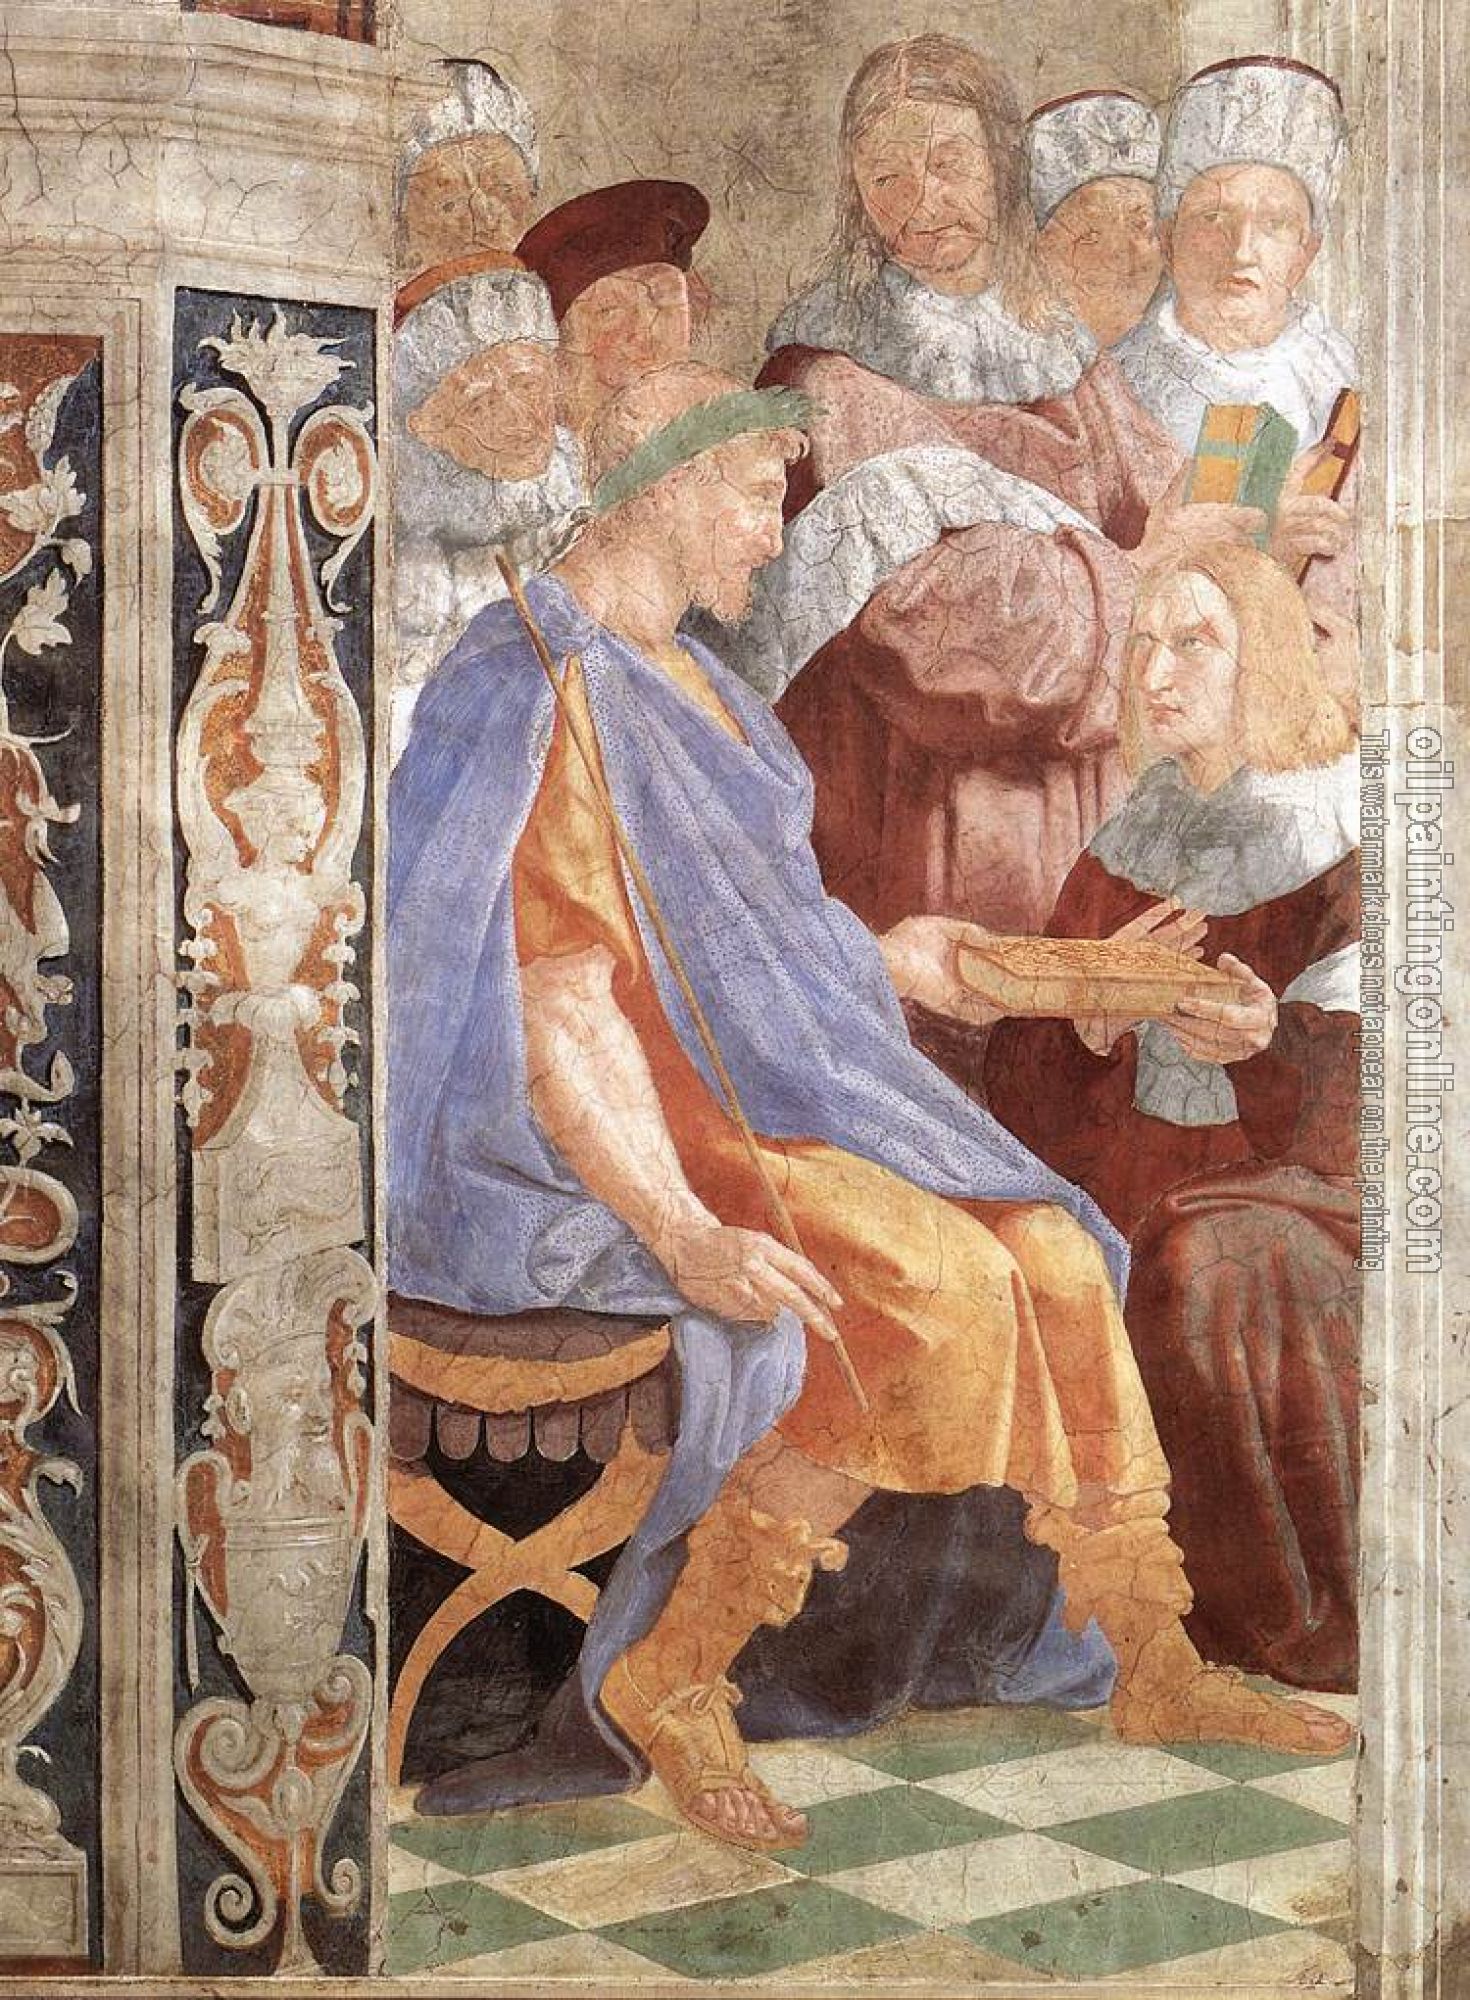 Raphael - Justinian Presenting the Pandects to Trebonianus